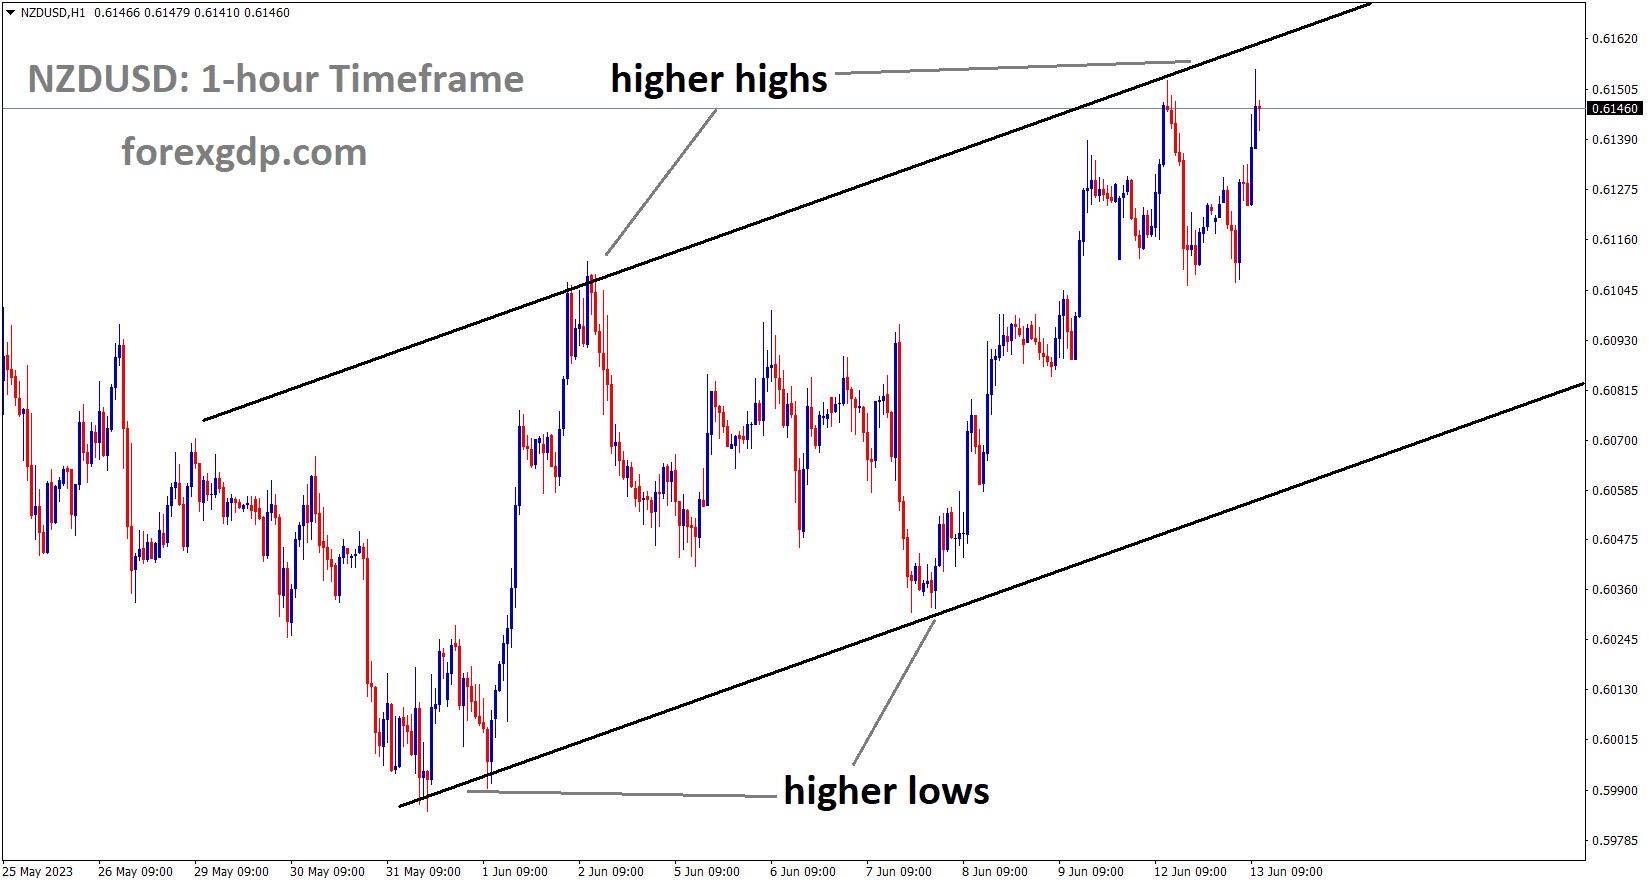 NZDUSD is moving in an Ascending channel and the market has reached the higher high area of the channel